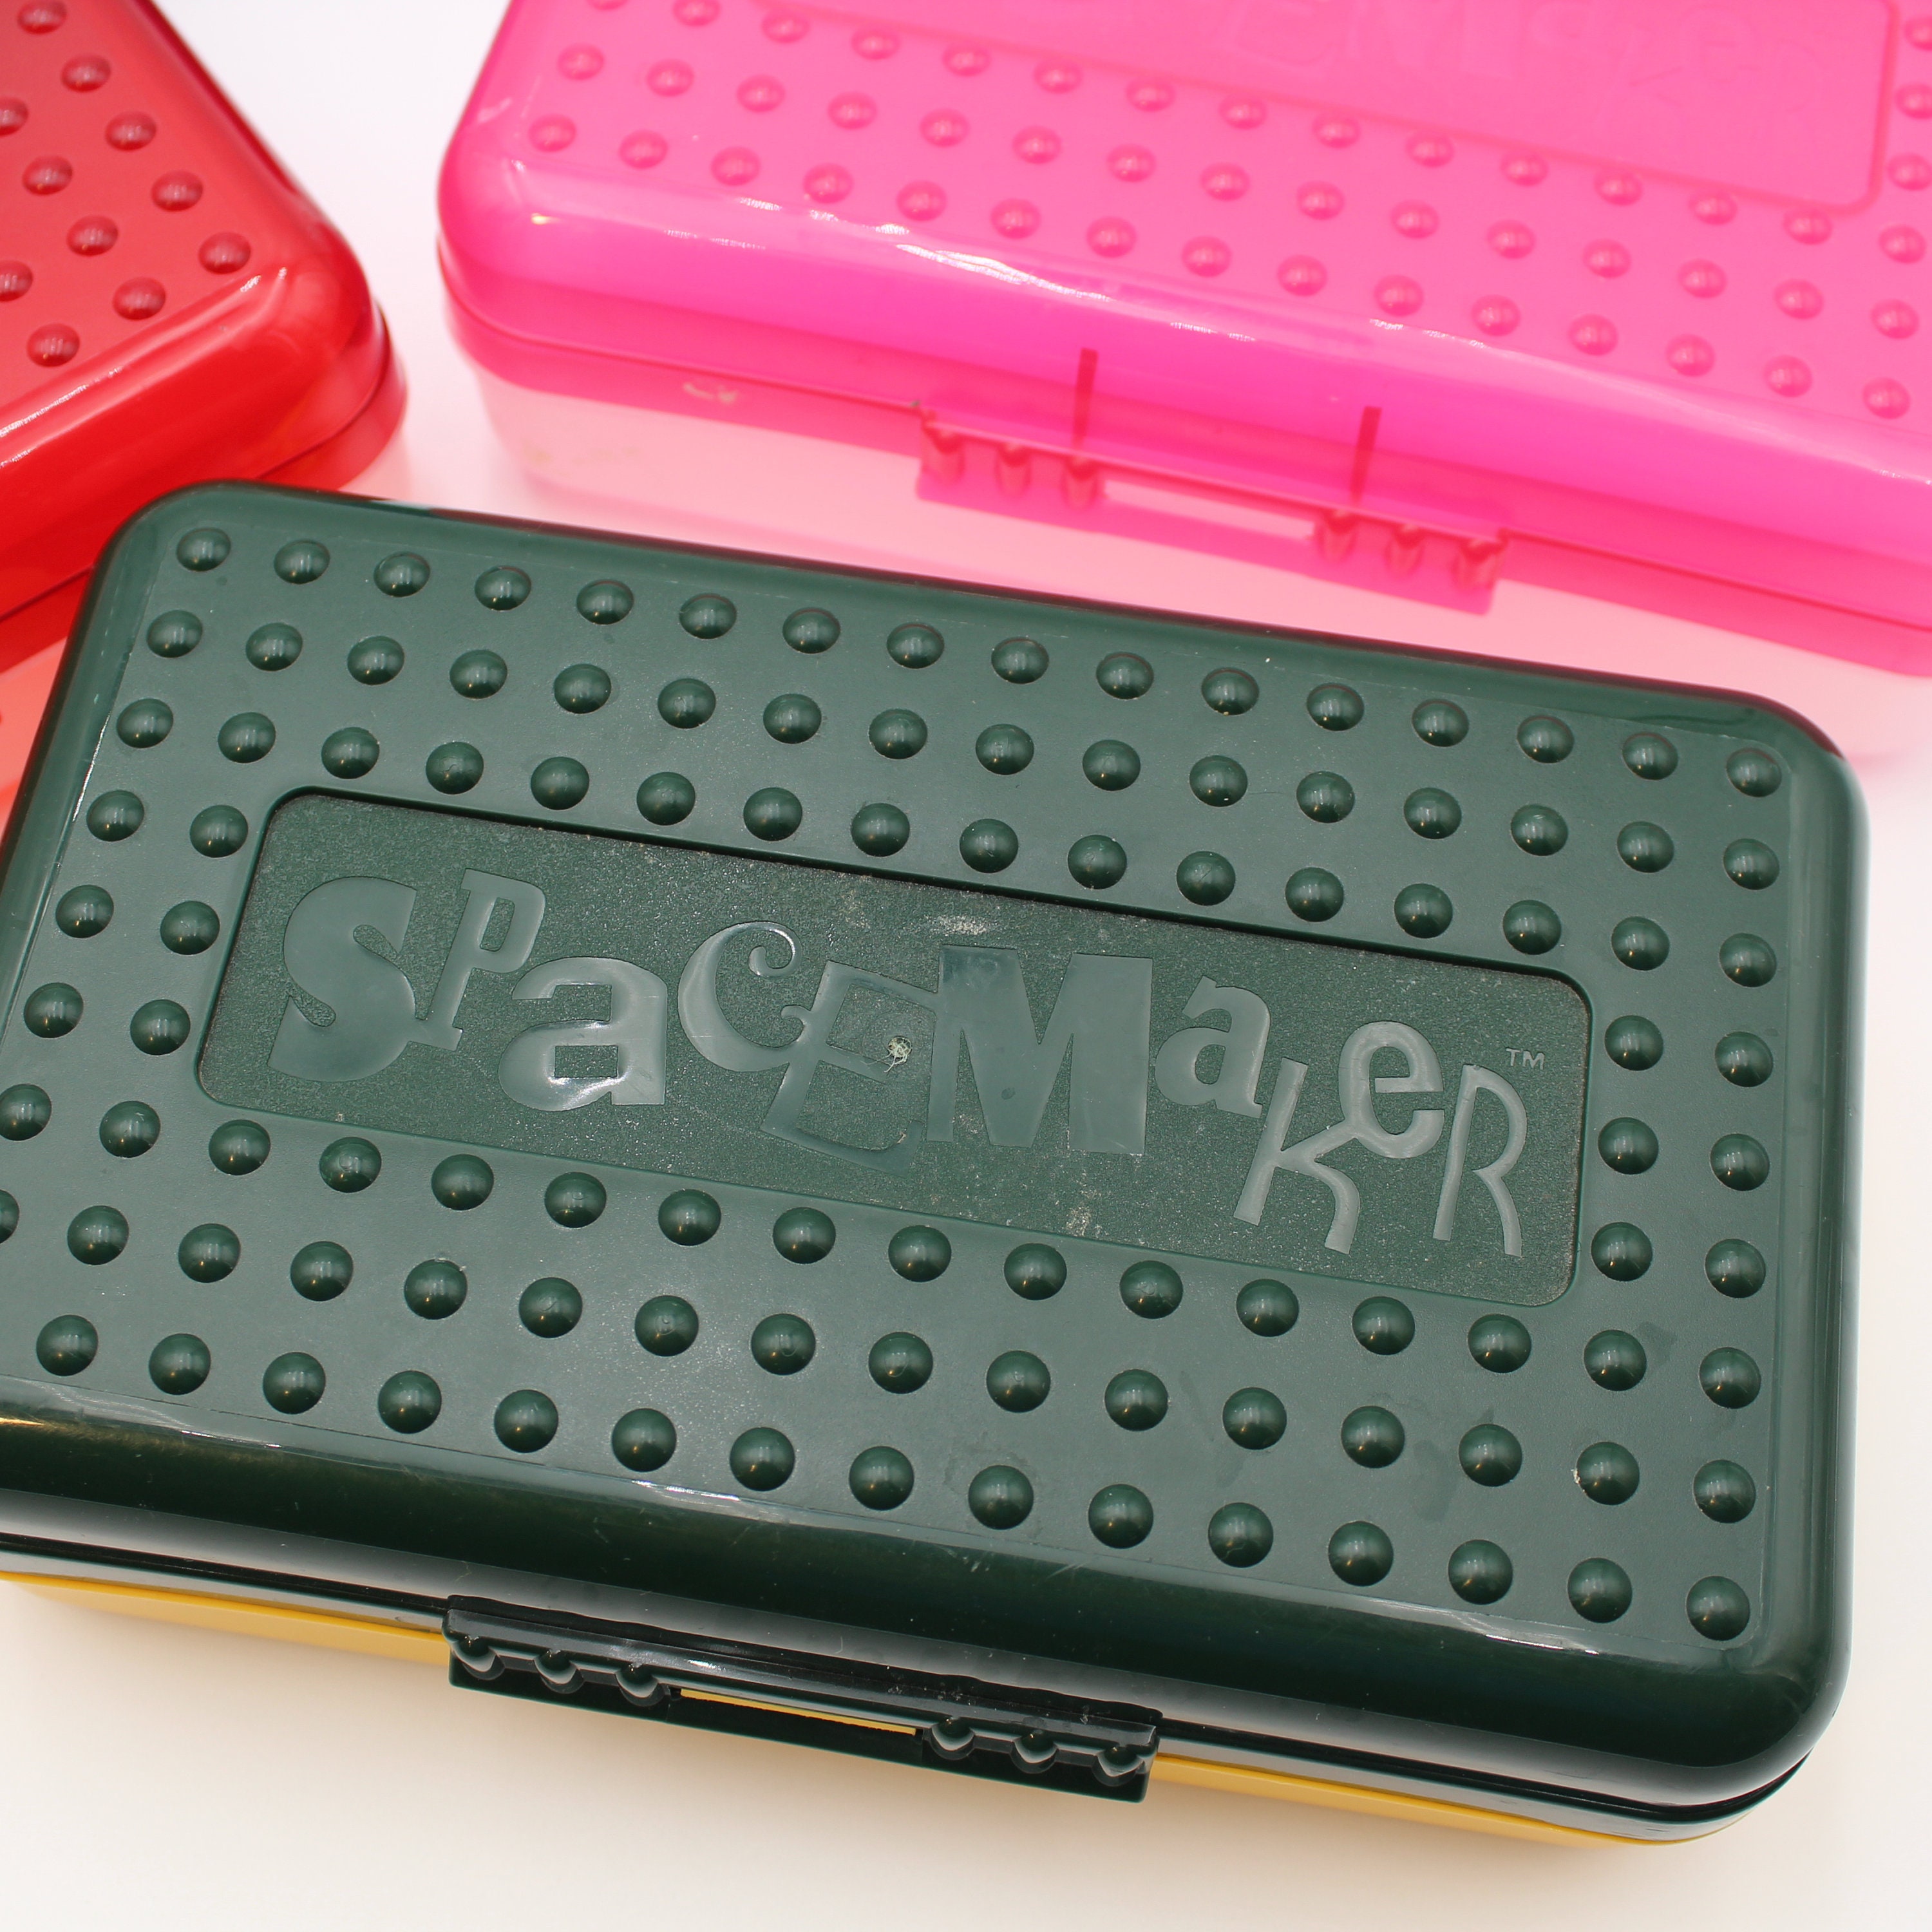 I know you all remember the Spacemaker pencil box! : r/nostalgia